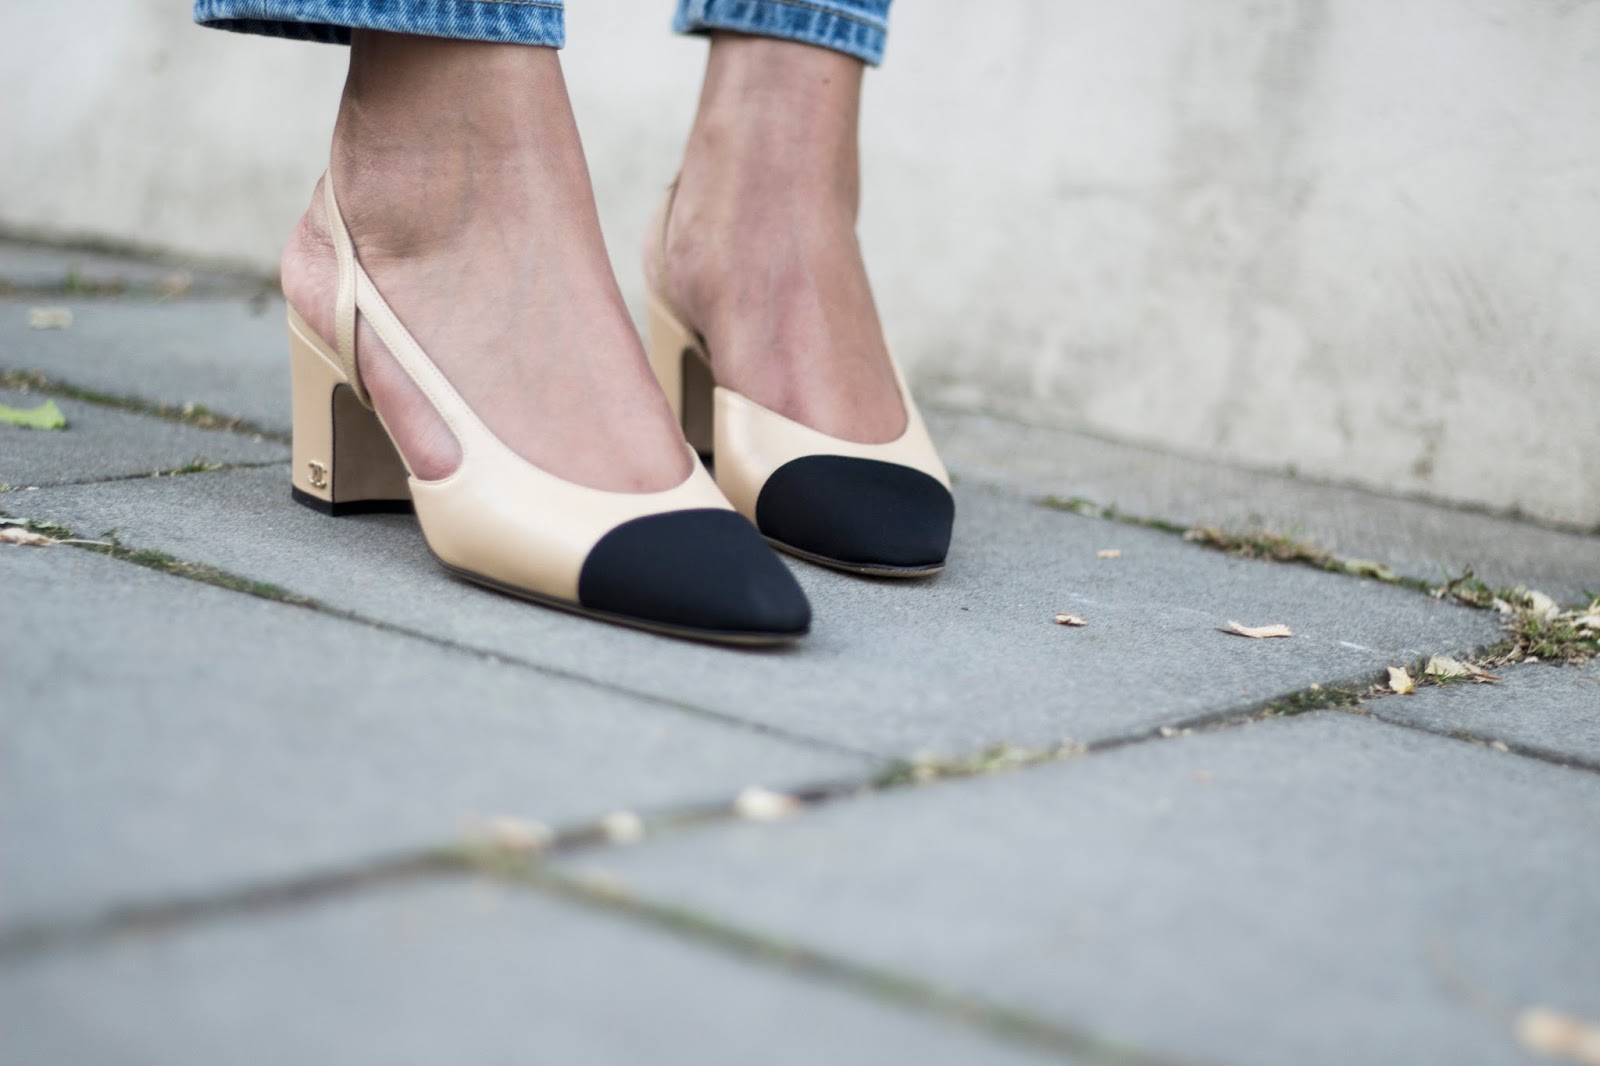 Claire Wreck klarhed SHOES, GLORIOUS SHOES! - CHANEL SLINGBACKS REVIEW | W H A T E V A W E A R S